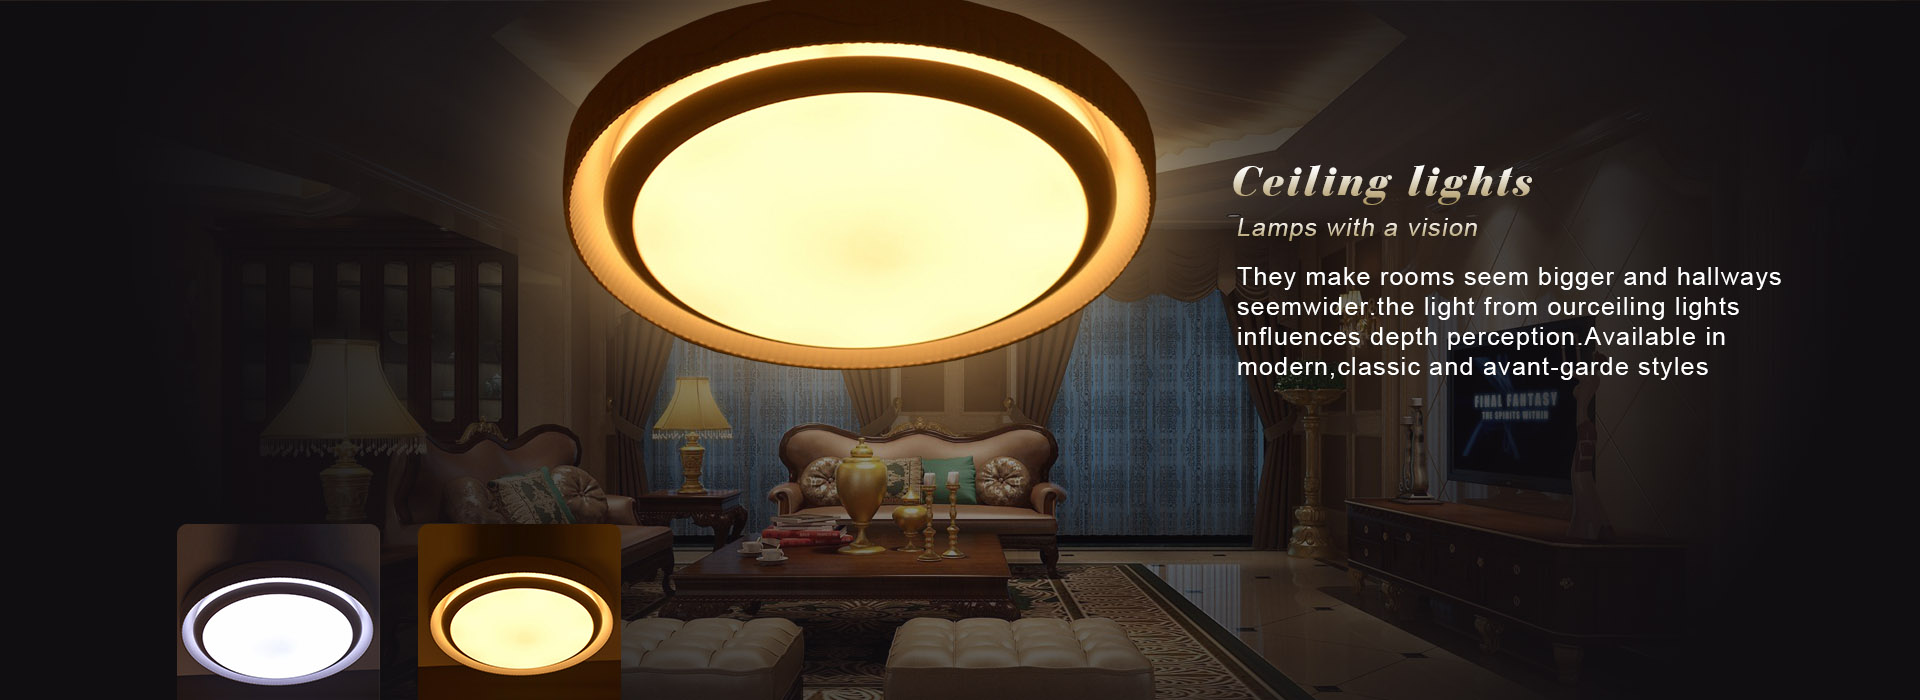 Ceiling Lights, Lamps with a vision, They make rooms seem bigger and hallways seem wider.the light from our ceiling lights influences depth perception.Available in modern,classic and avant-garde styles